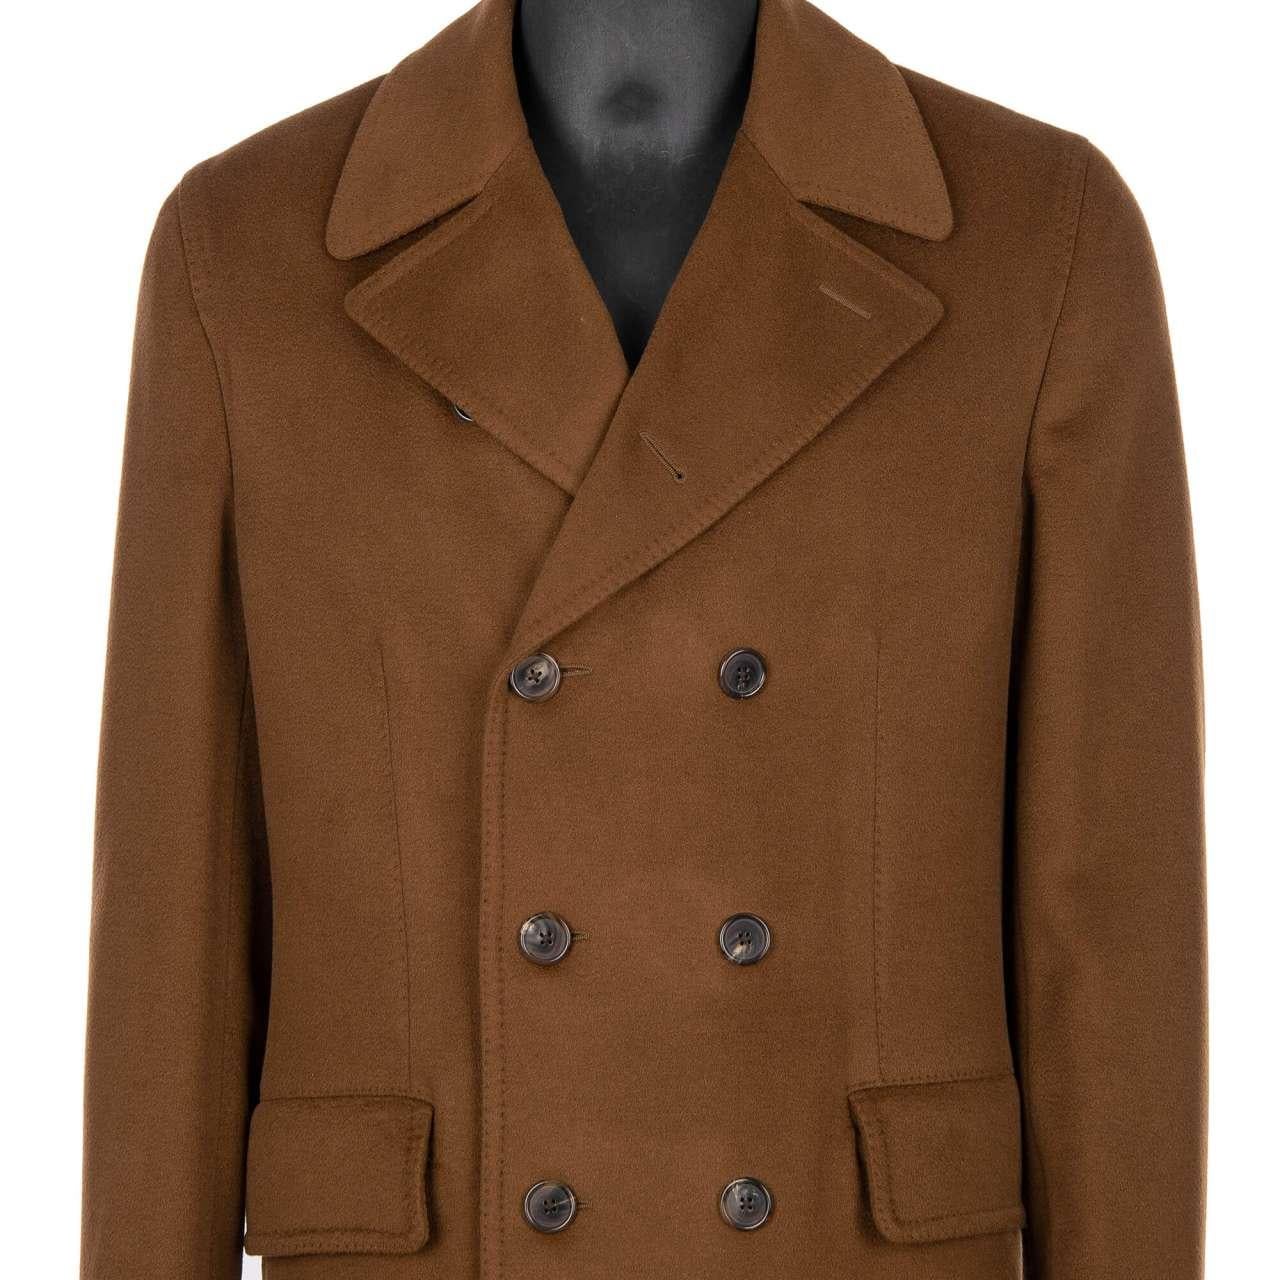 Dolce & Gabbana - Double-Breasted Cashmere Coat Camel Brown 58 For Sale 2